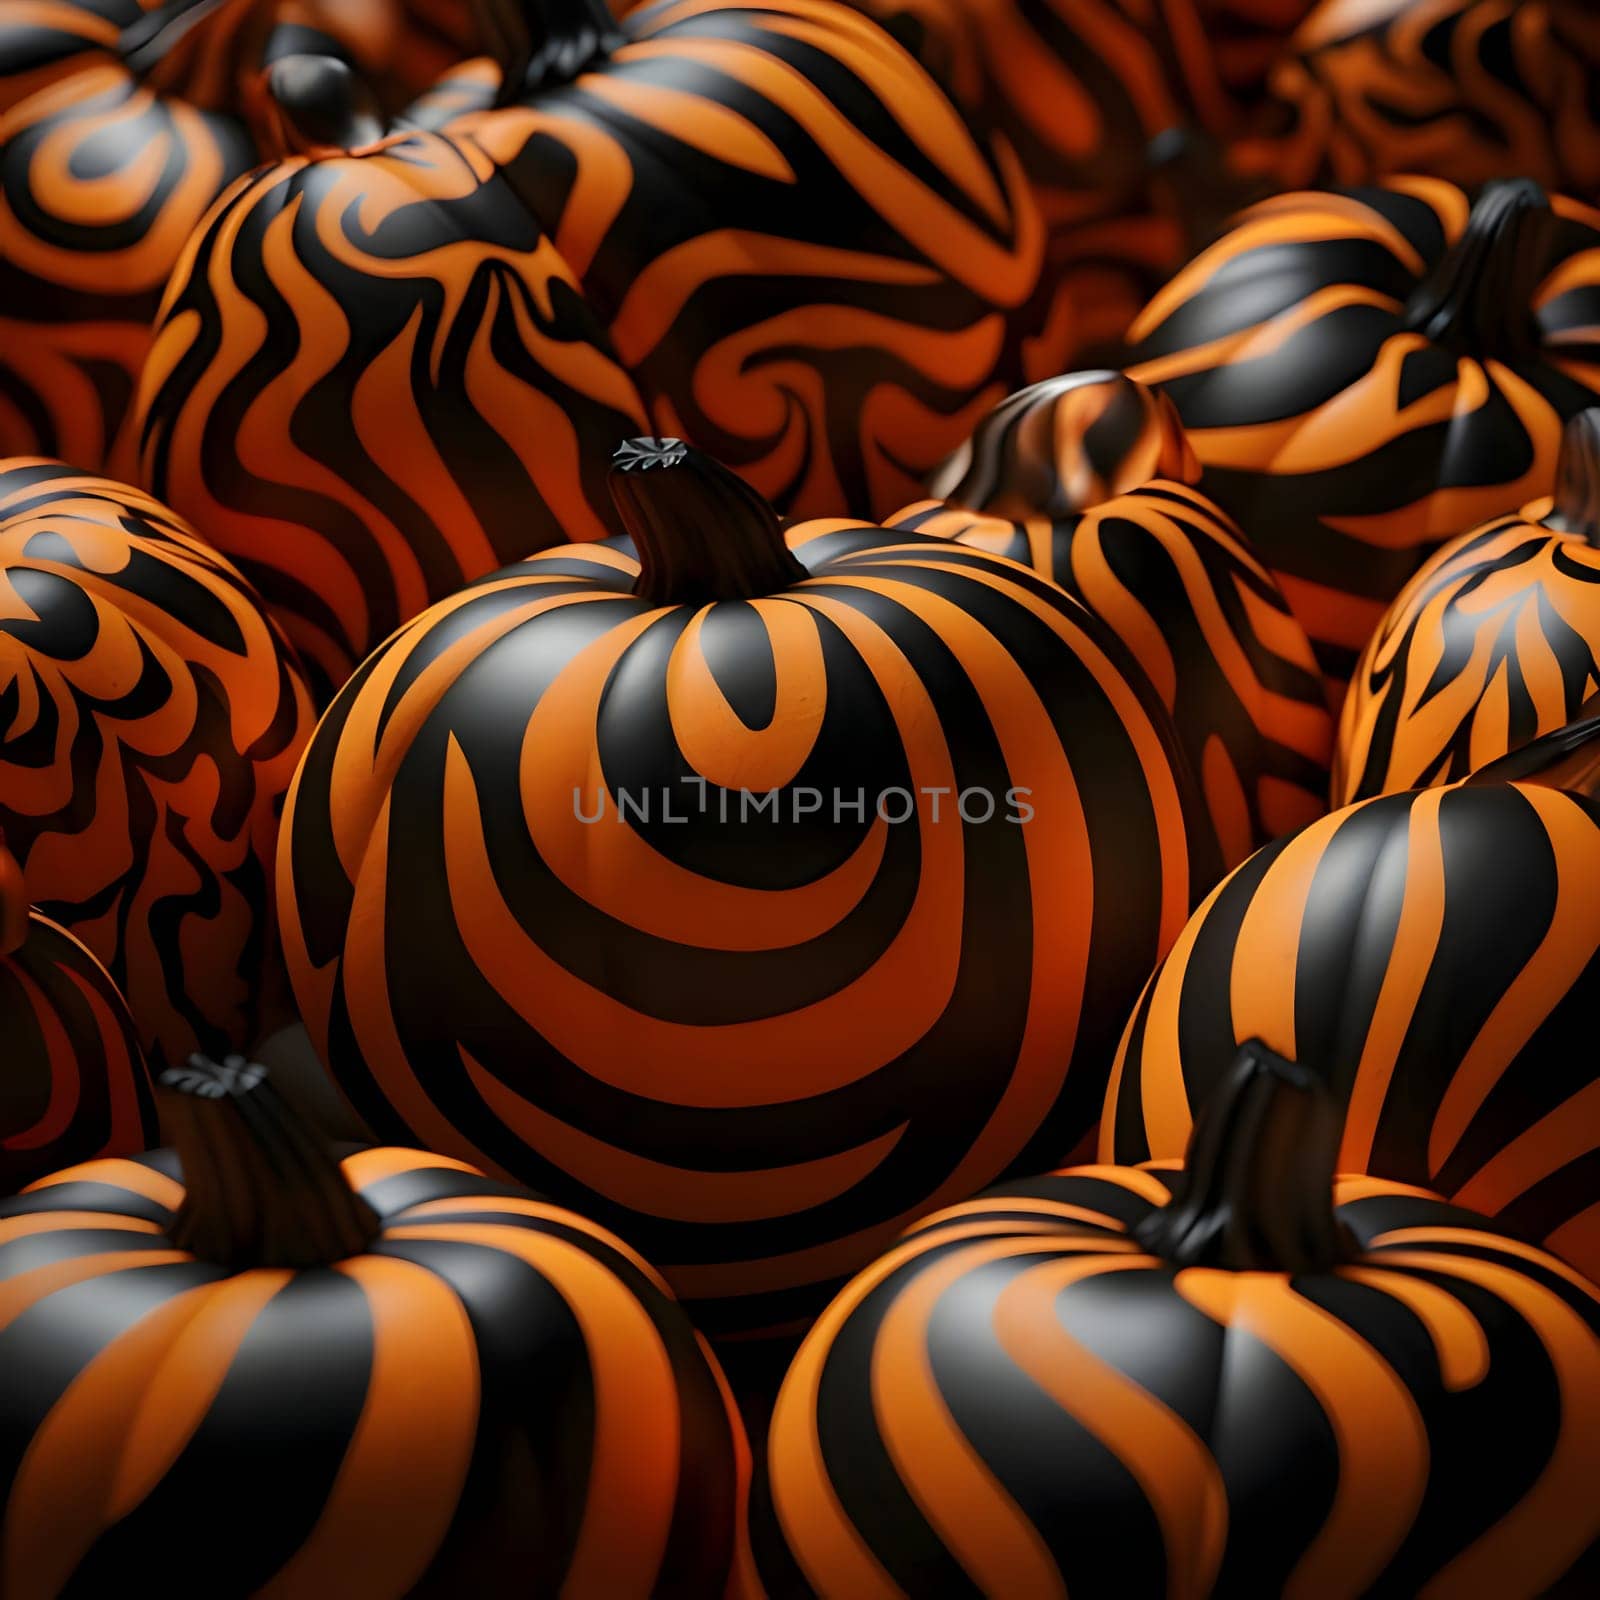 Patterns and banners backgrounds: Halloween pumpkins background with orange and black stripes. 3d render